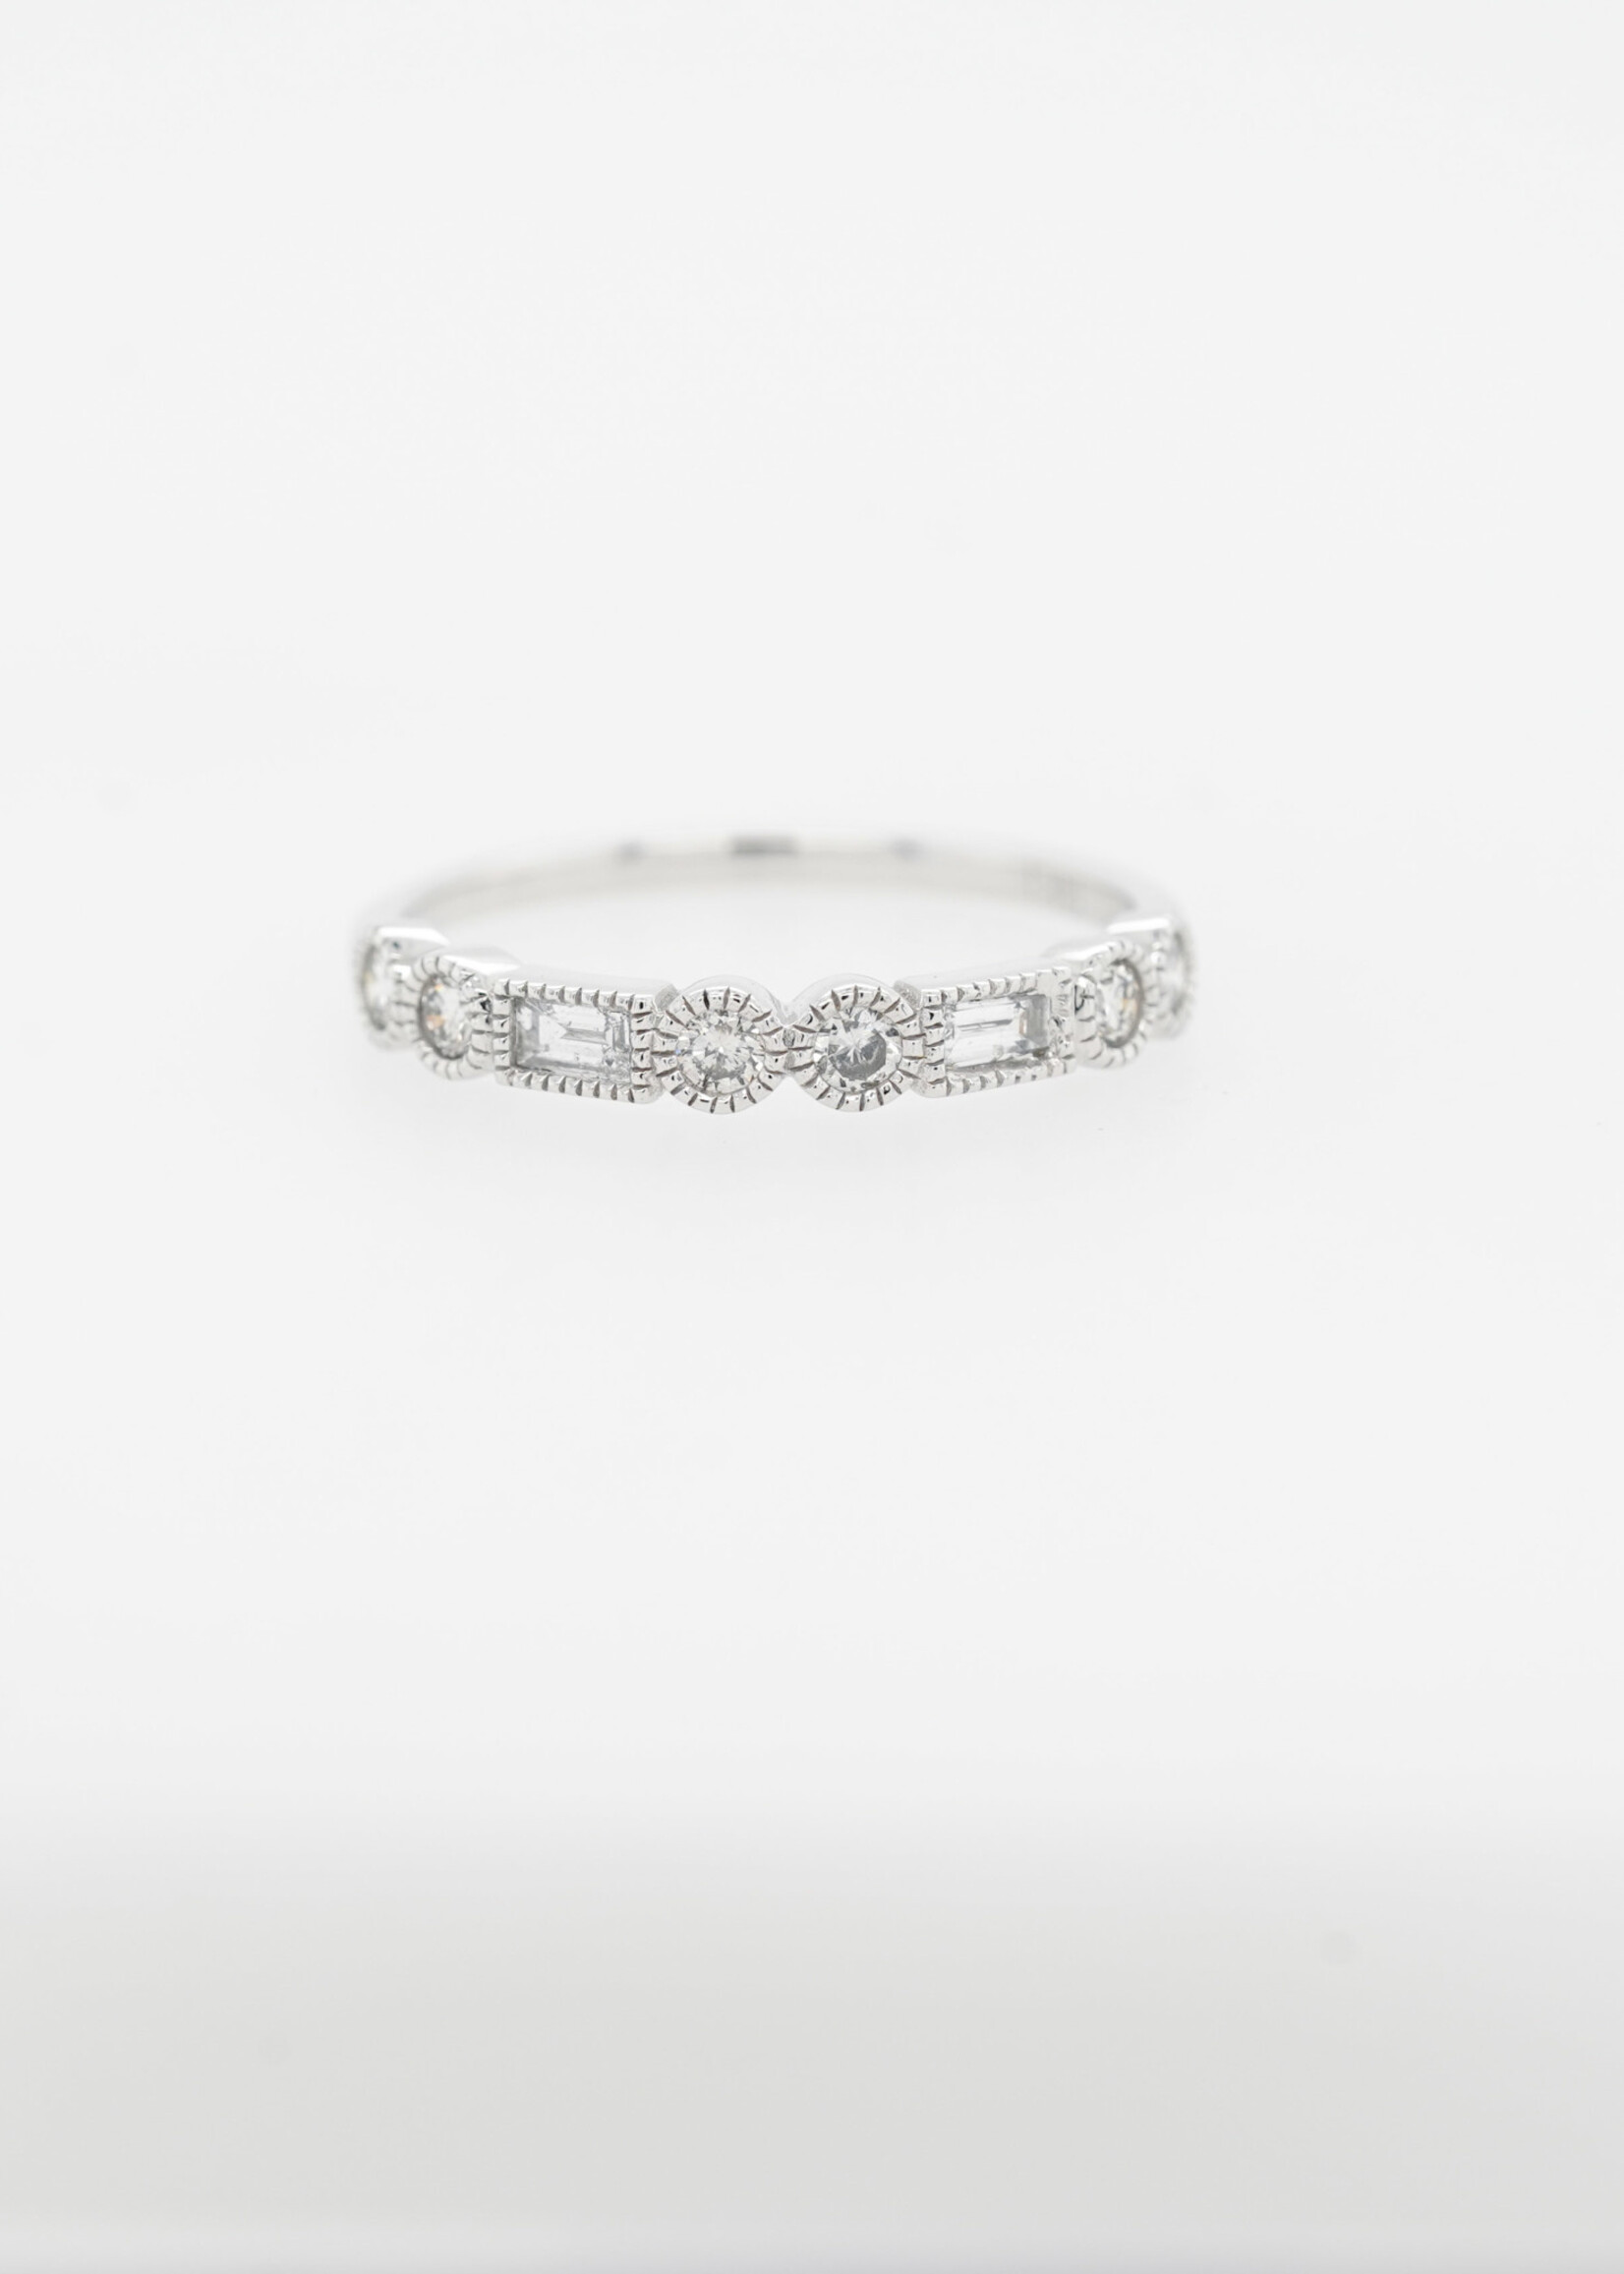 14KW 1.75g .45ctw Diamond Stackable Band (size 7)